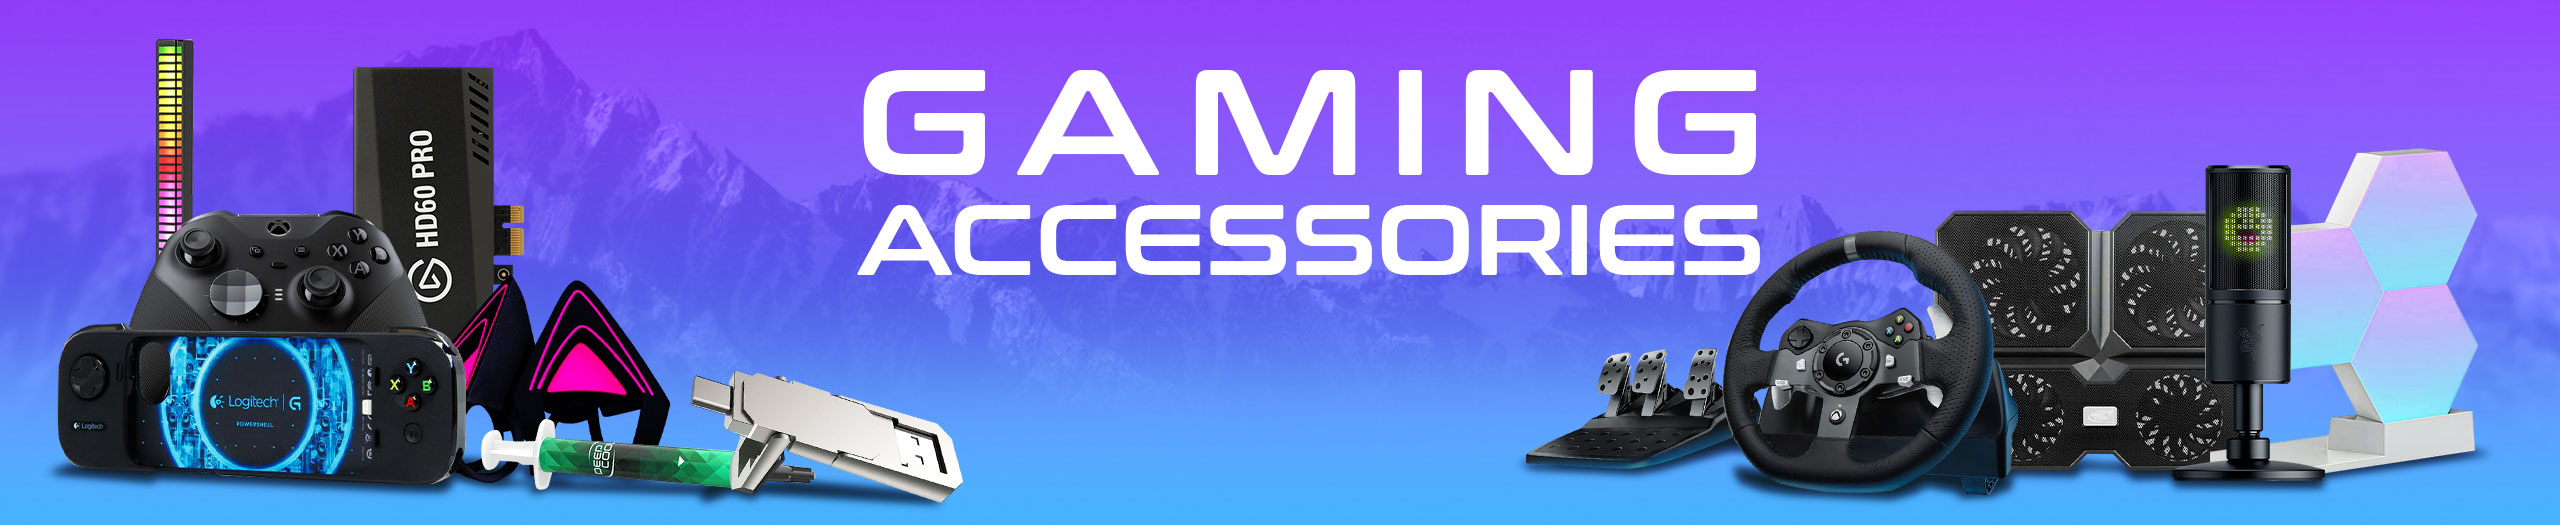 gaming-accessories-2560px-v1